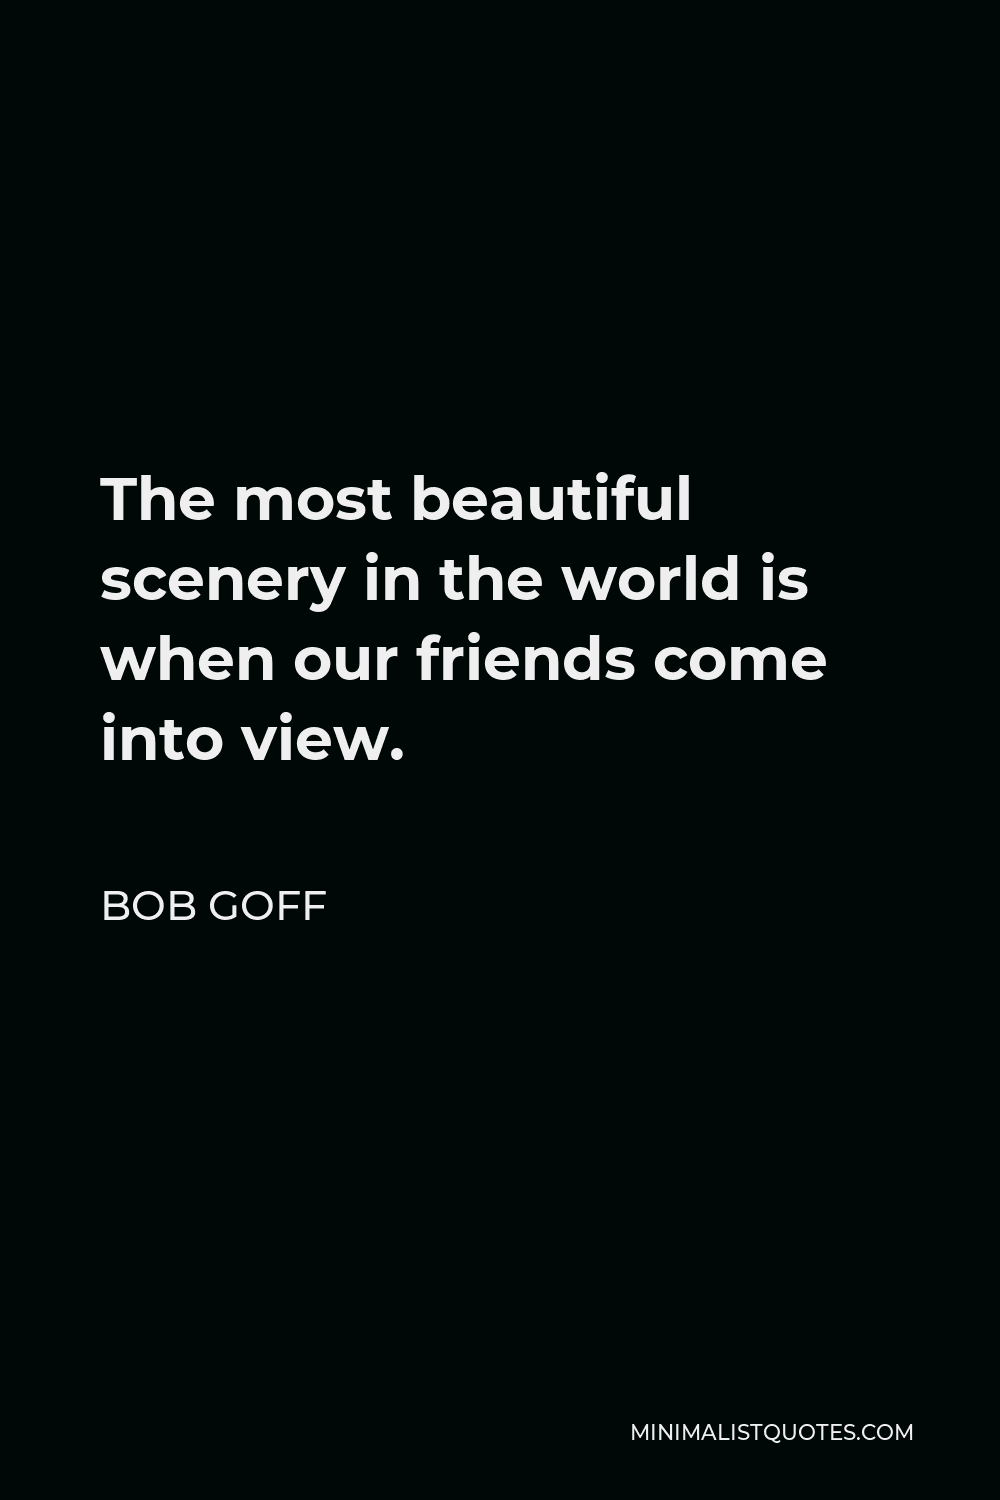 Bob Goff Quote - The most beautiful scenery in the world is when our friends come into view.